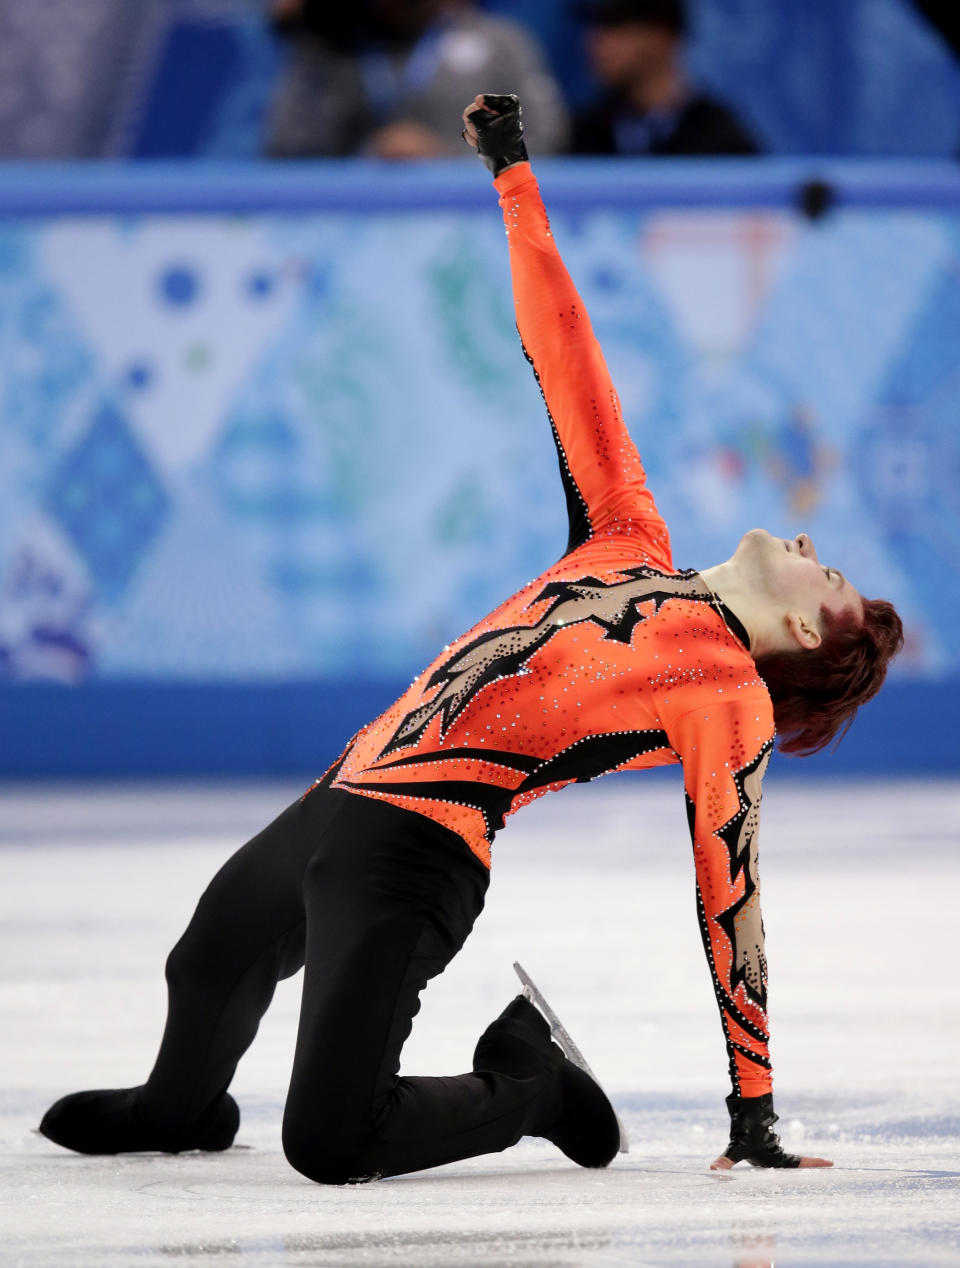 Misha Ge of Uzbekistan competes in the men's short program figure skating competition at the Iceberg Skating Palace during the 2014 Winter Olympics, Thursday, Feb. 13, 2014, in Sochi, Russia. (AP Photo/Bernat Armangue)